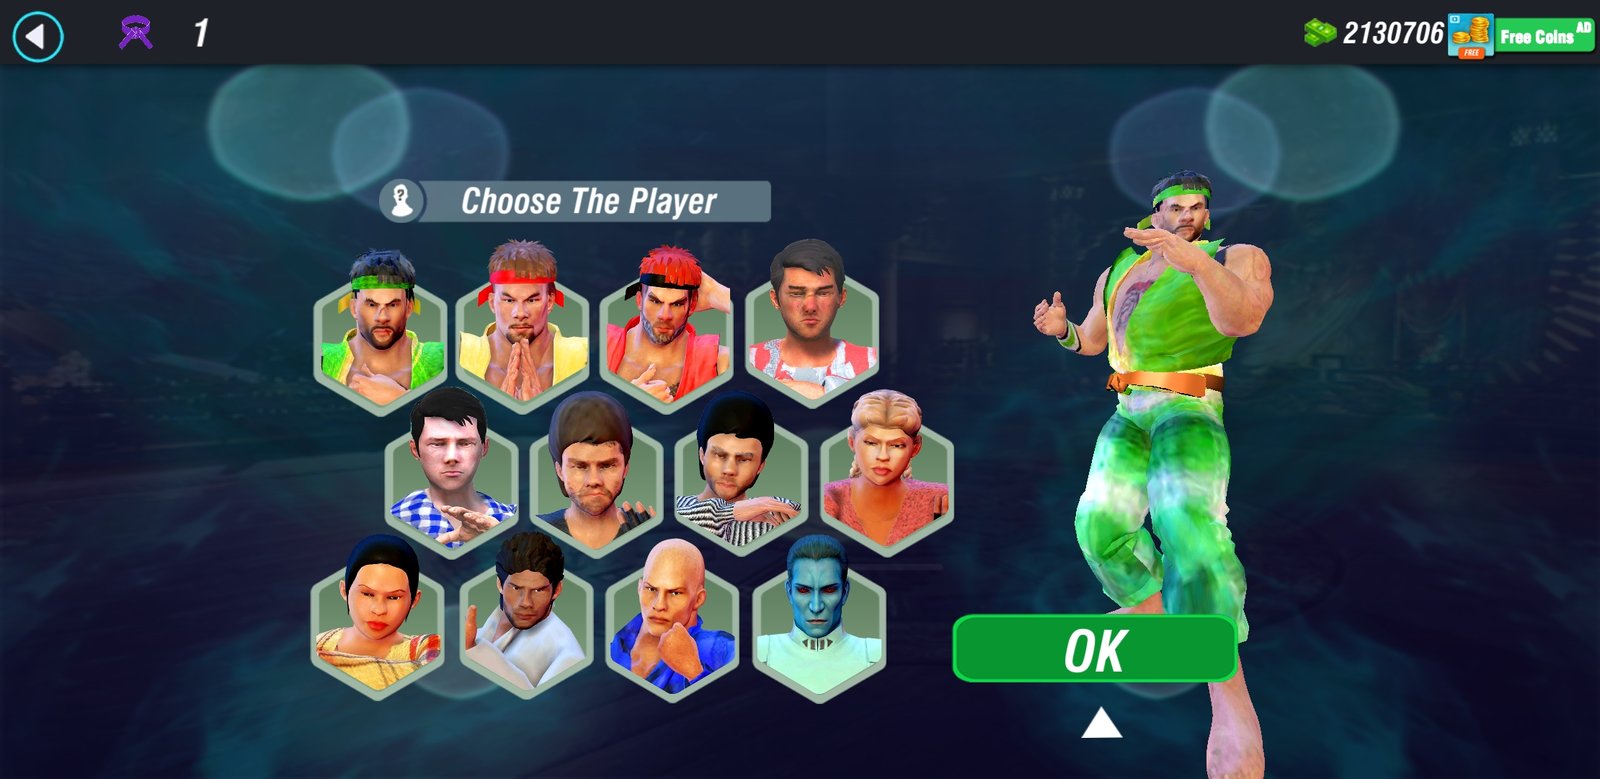 Fight King Apk Download for Android- Latest version 1.23.1120-  com.fkop.emumy.fighterking